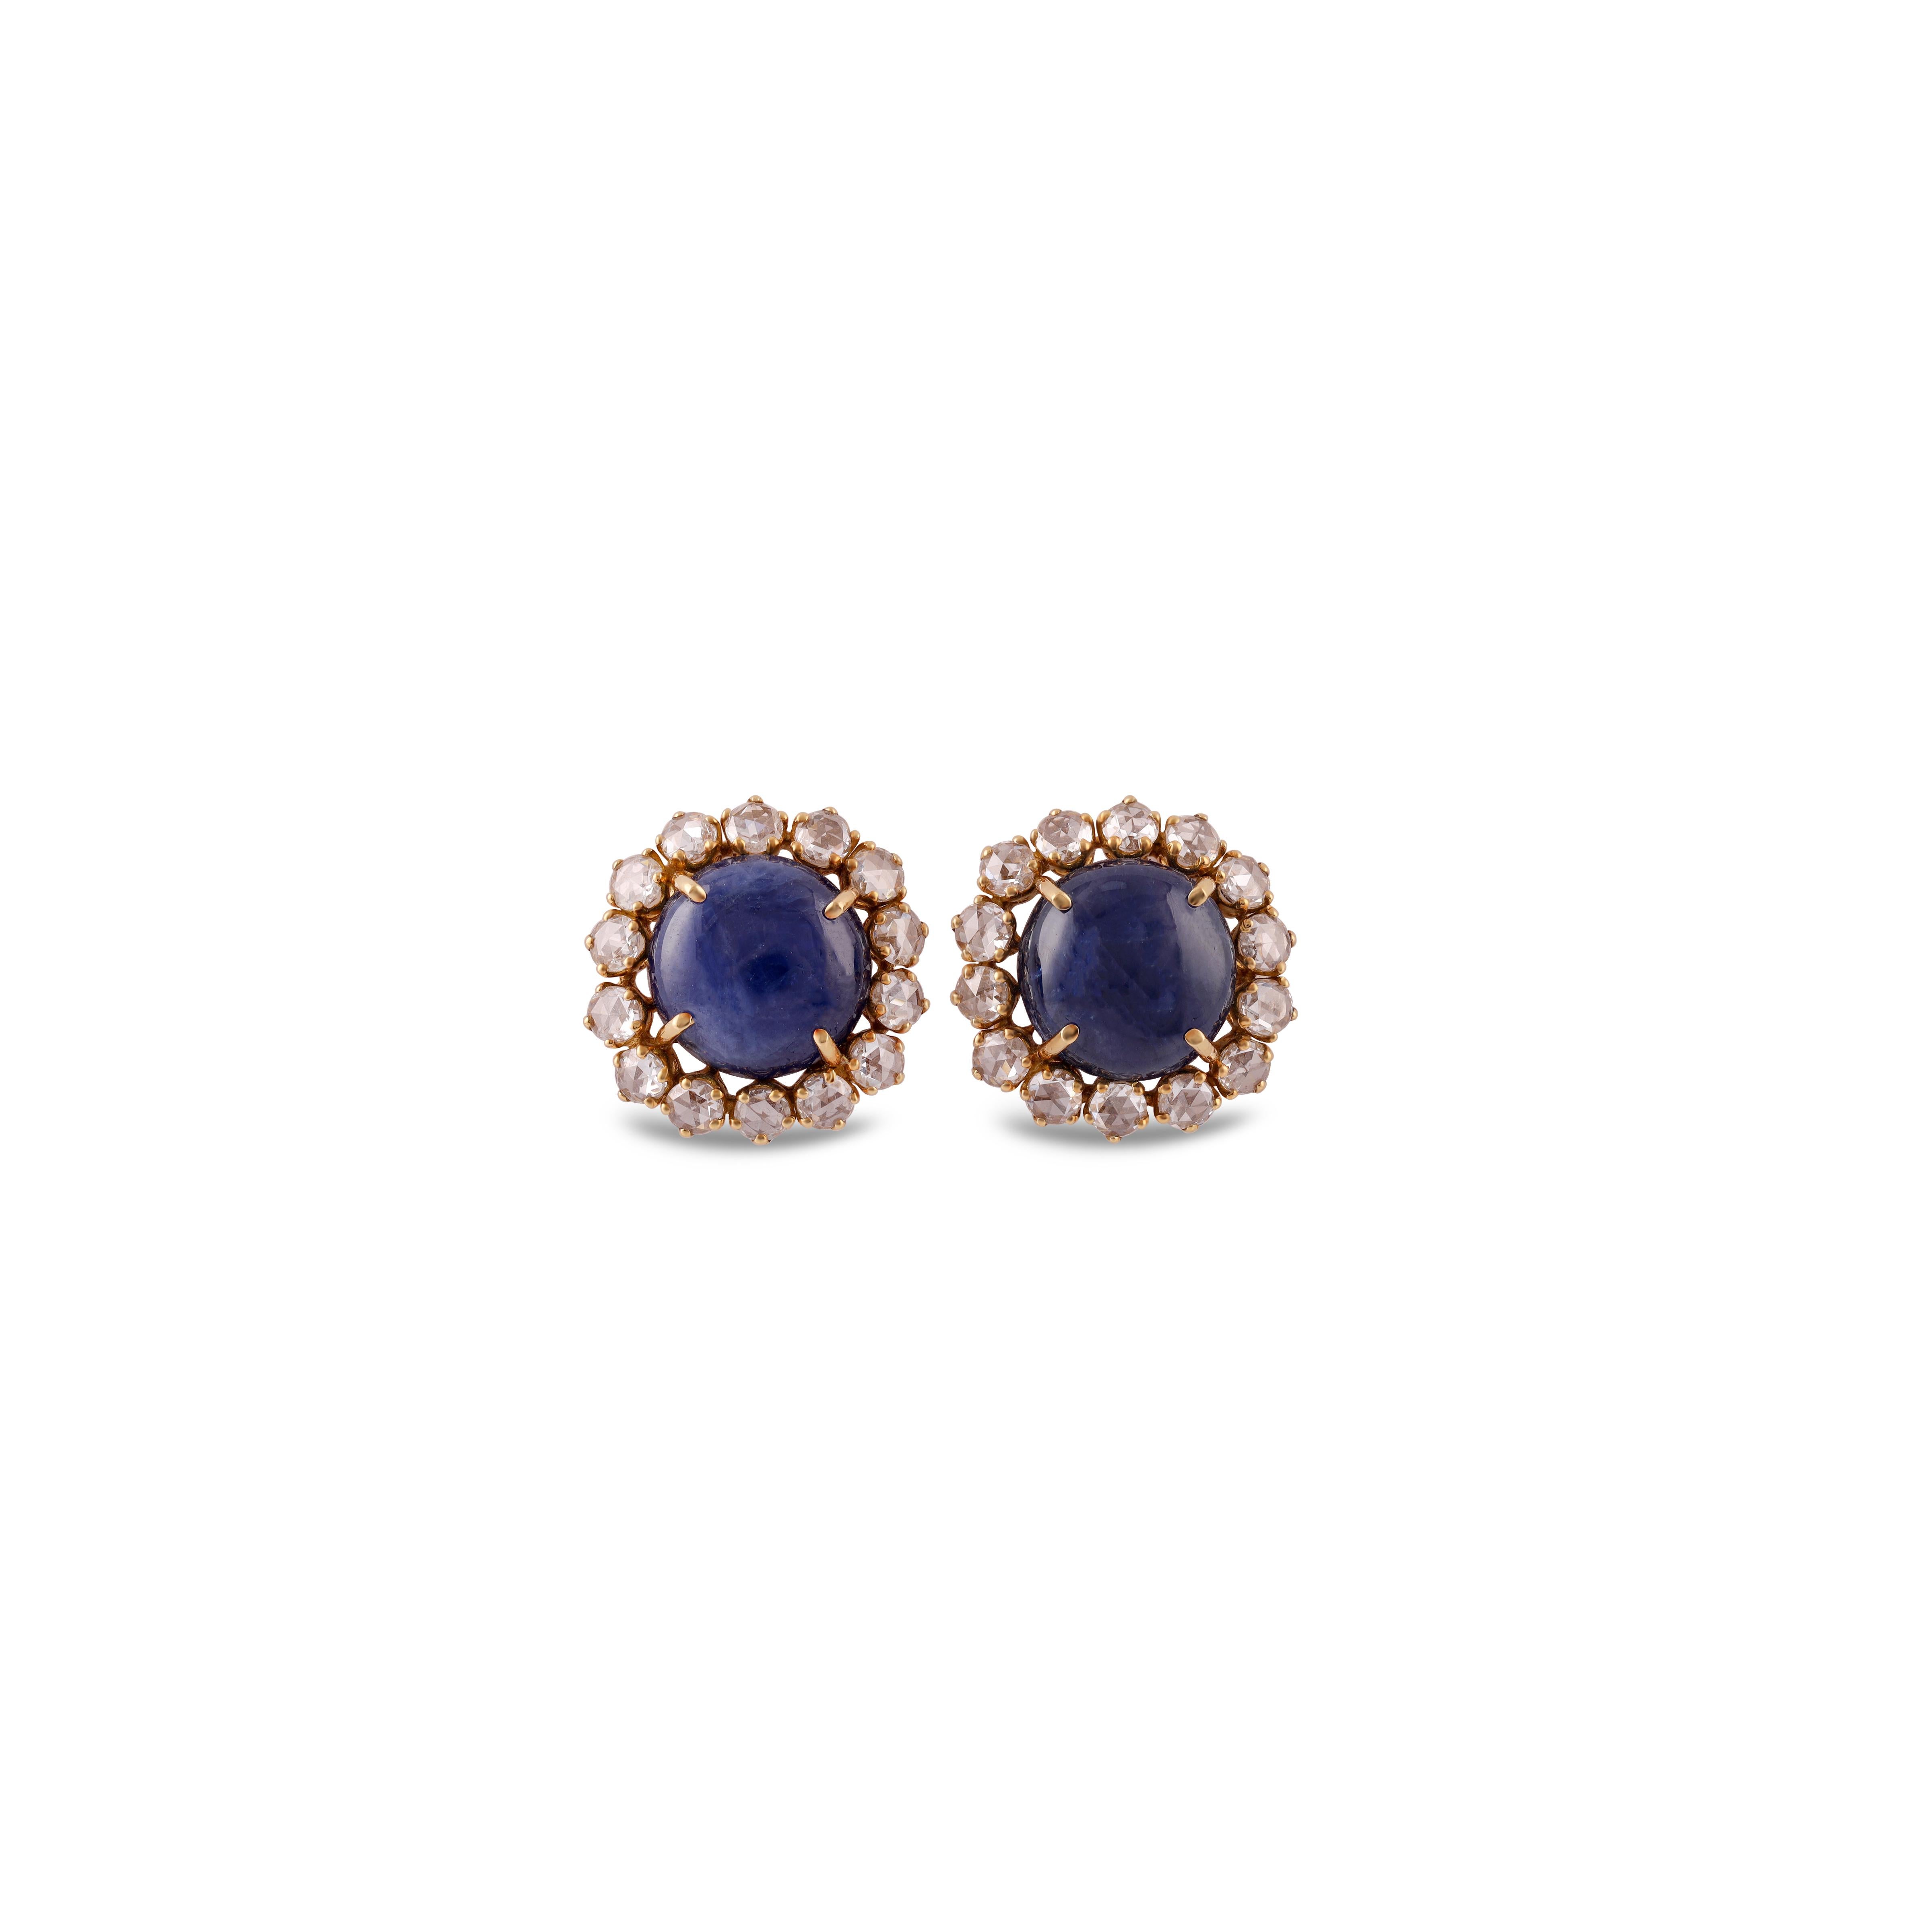 This is an elegant Natural Sapphire & diamond Earring studded in 18k gold with 2 piece of oval Cut  CAB Natural Sapphire weight 18.29 carat which is surrounded by 28 pieces of round shaped diamonds weight 2.56 carat, this entire Earring studded in